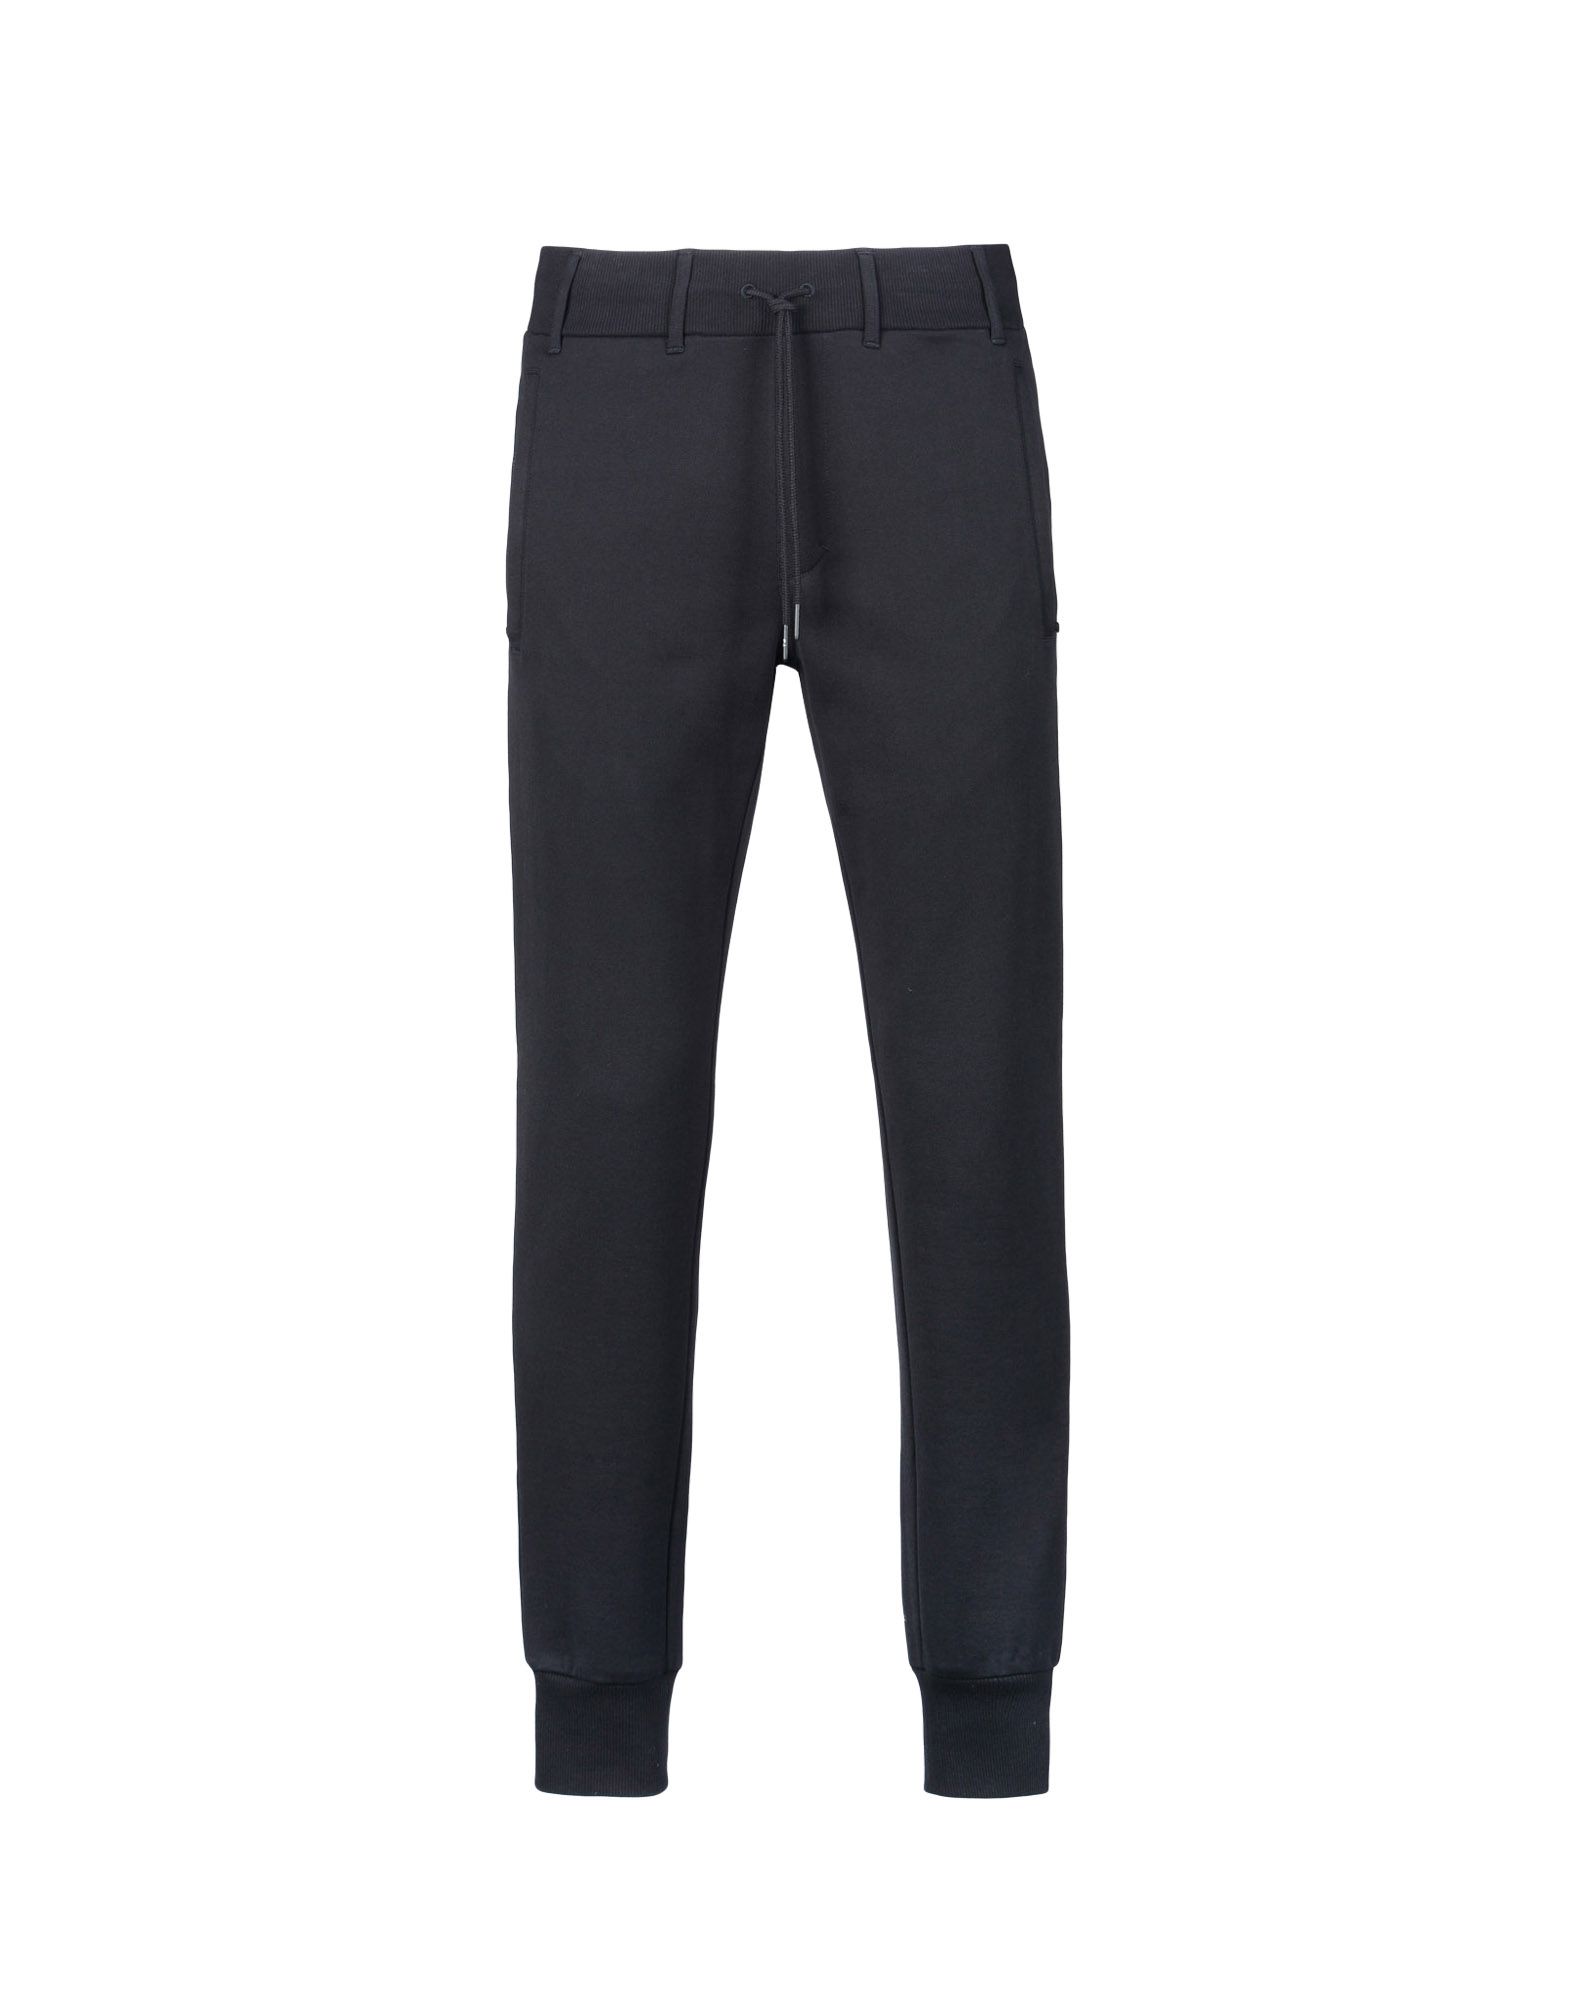 Y 3 Classic Ft Cuff Pant For Men Adidas Y 3 Official Store | Free ...